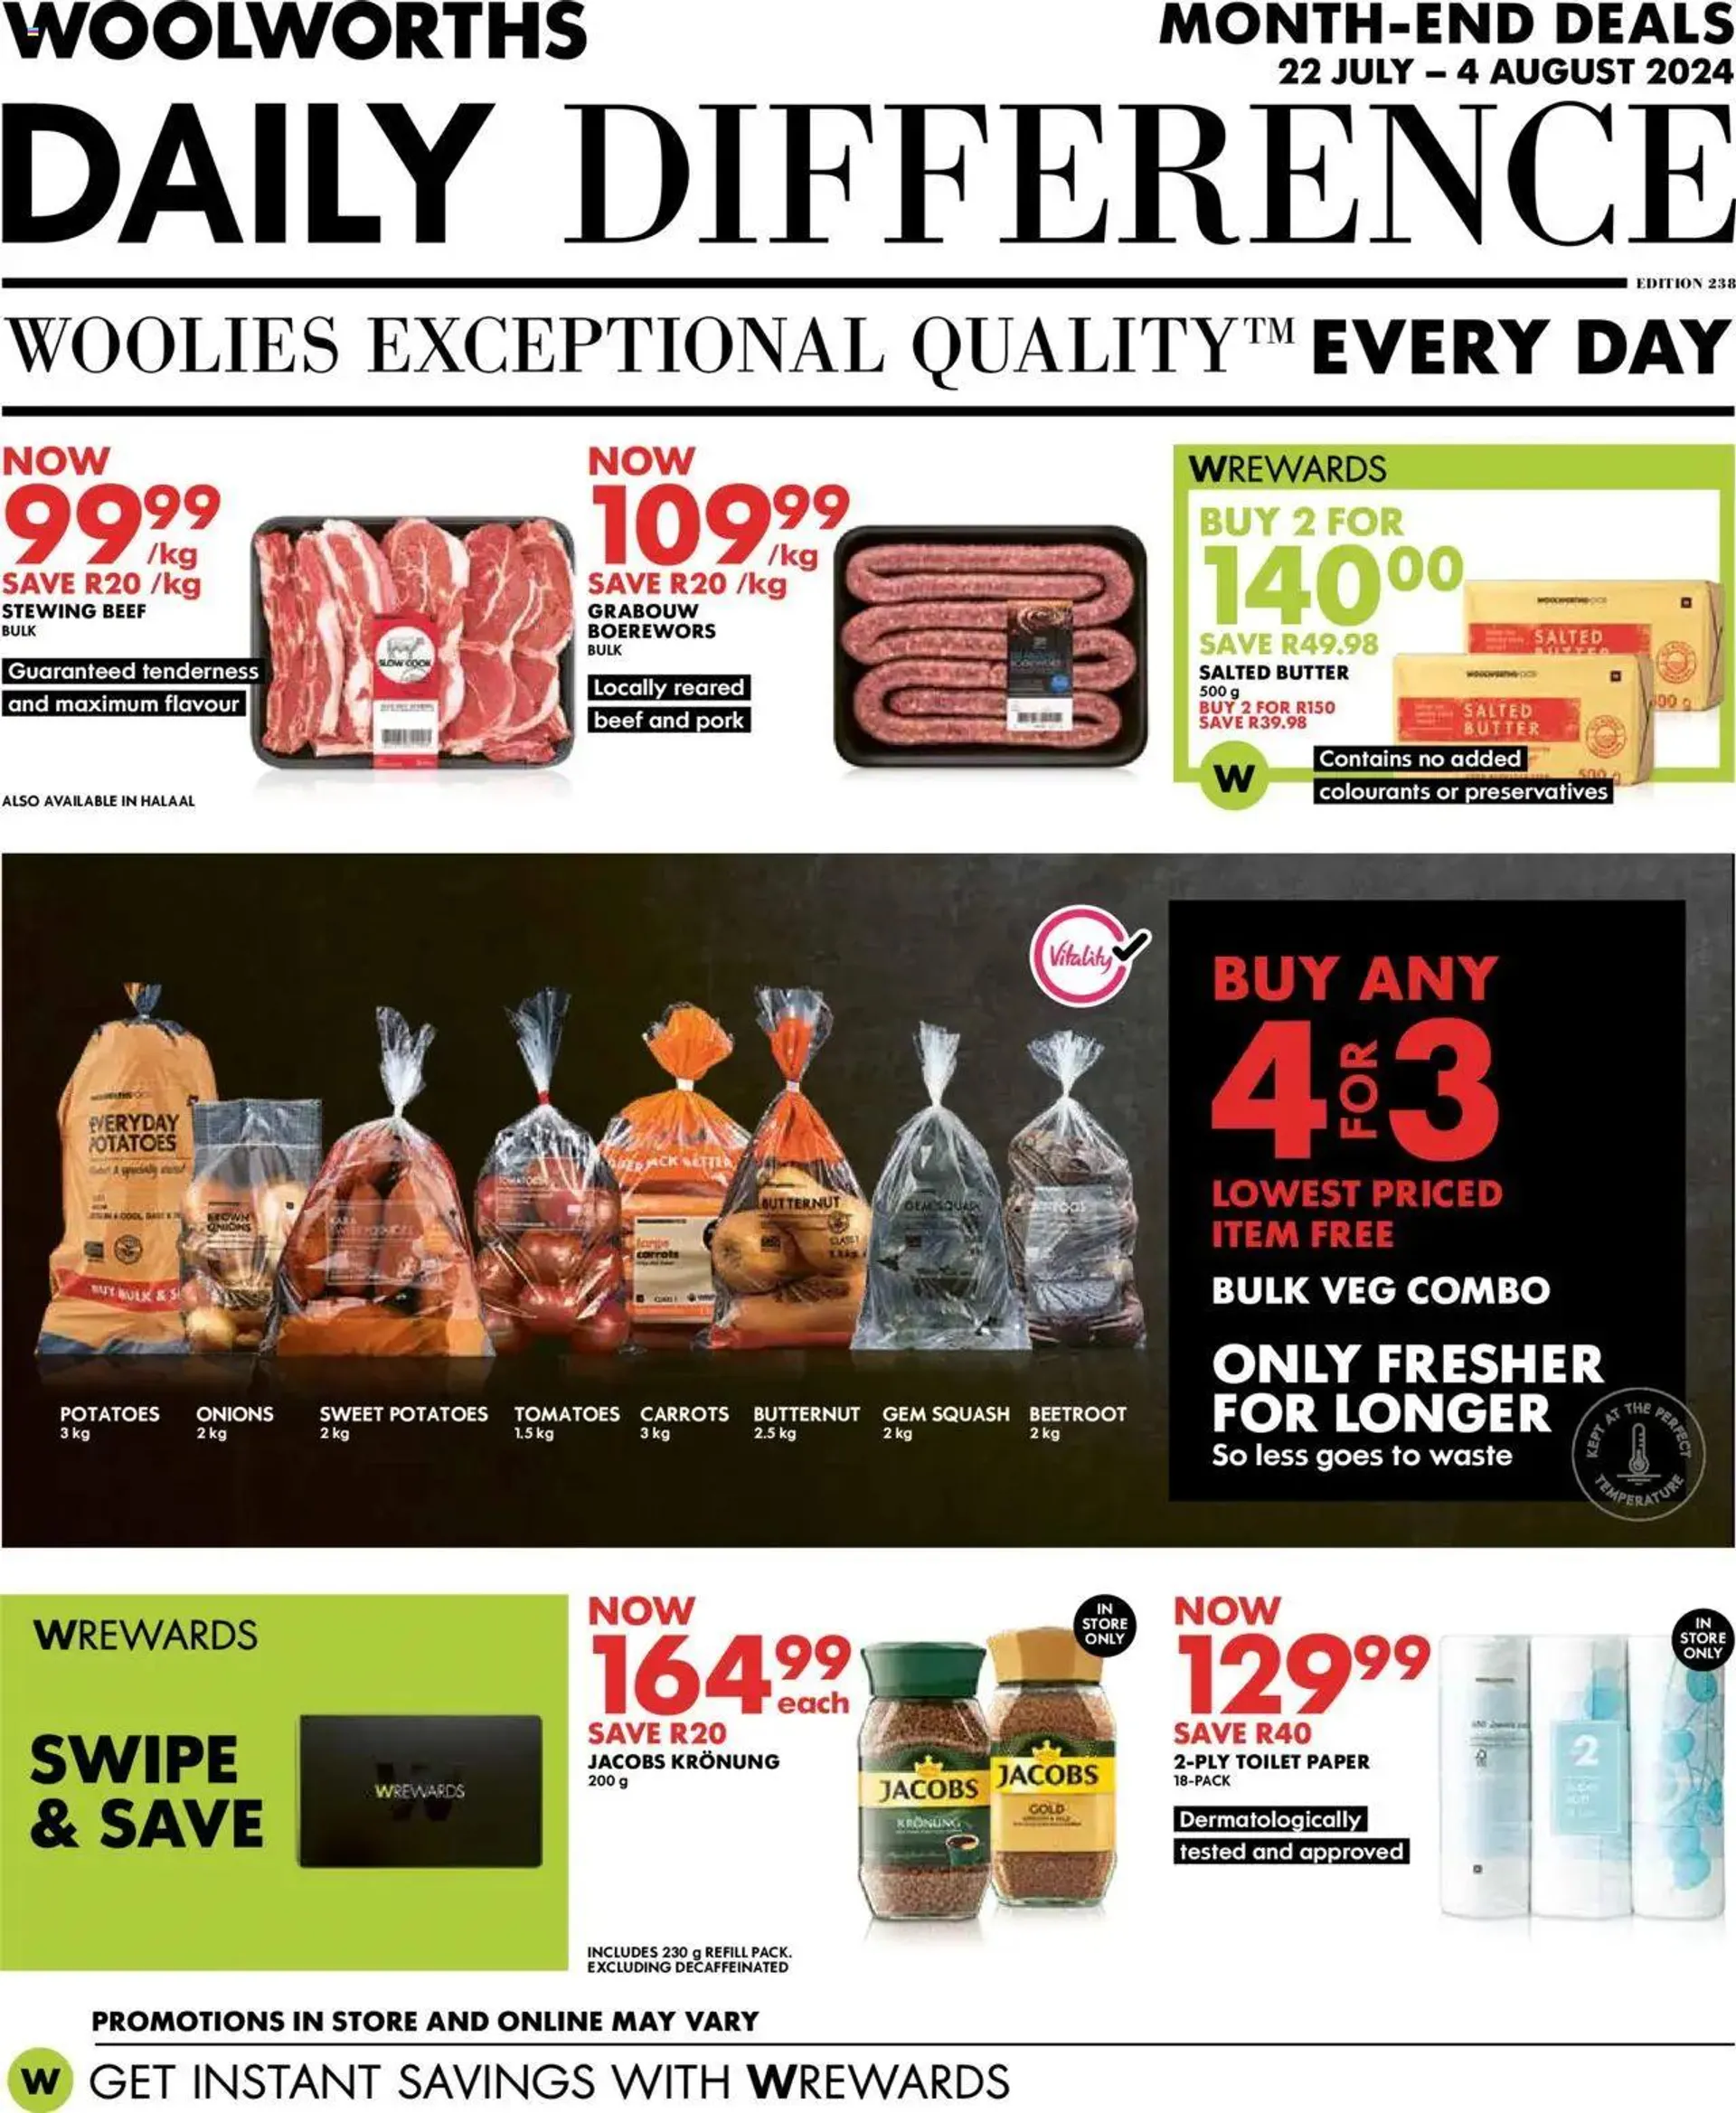 Woolworths Daily Difference - Gauteng - 0